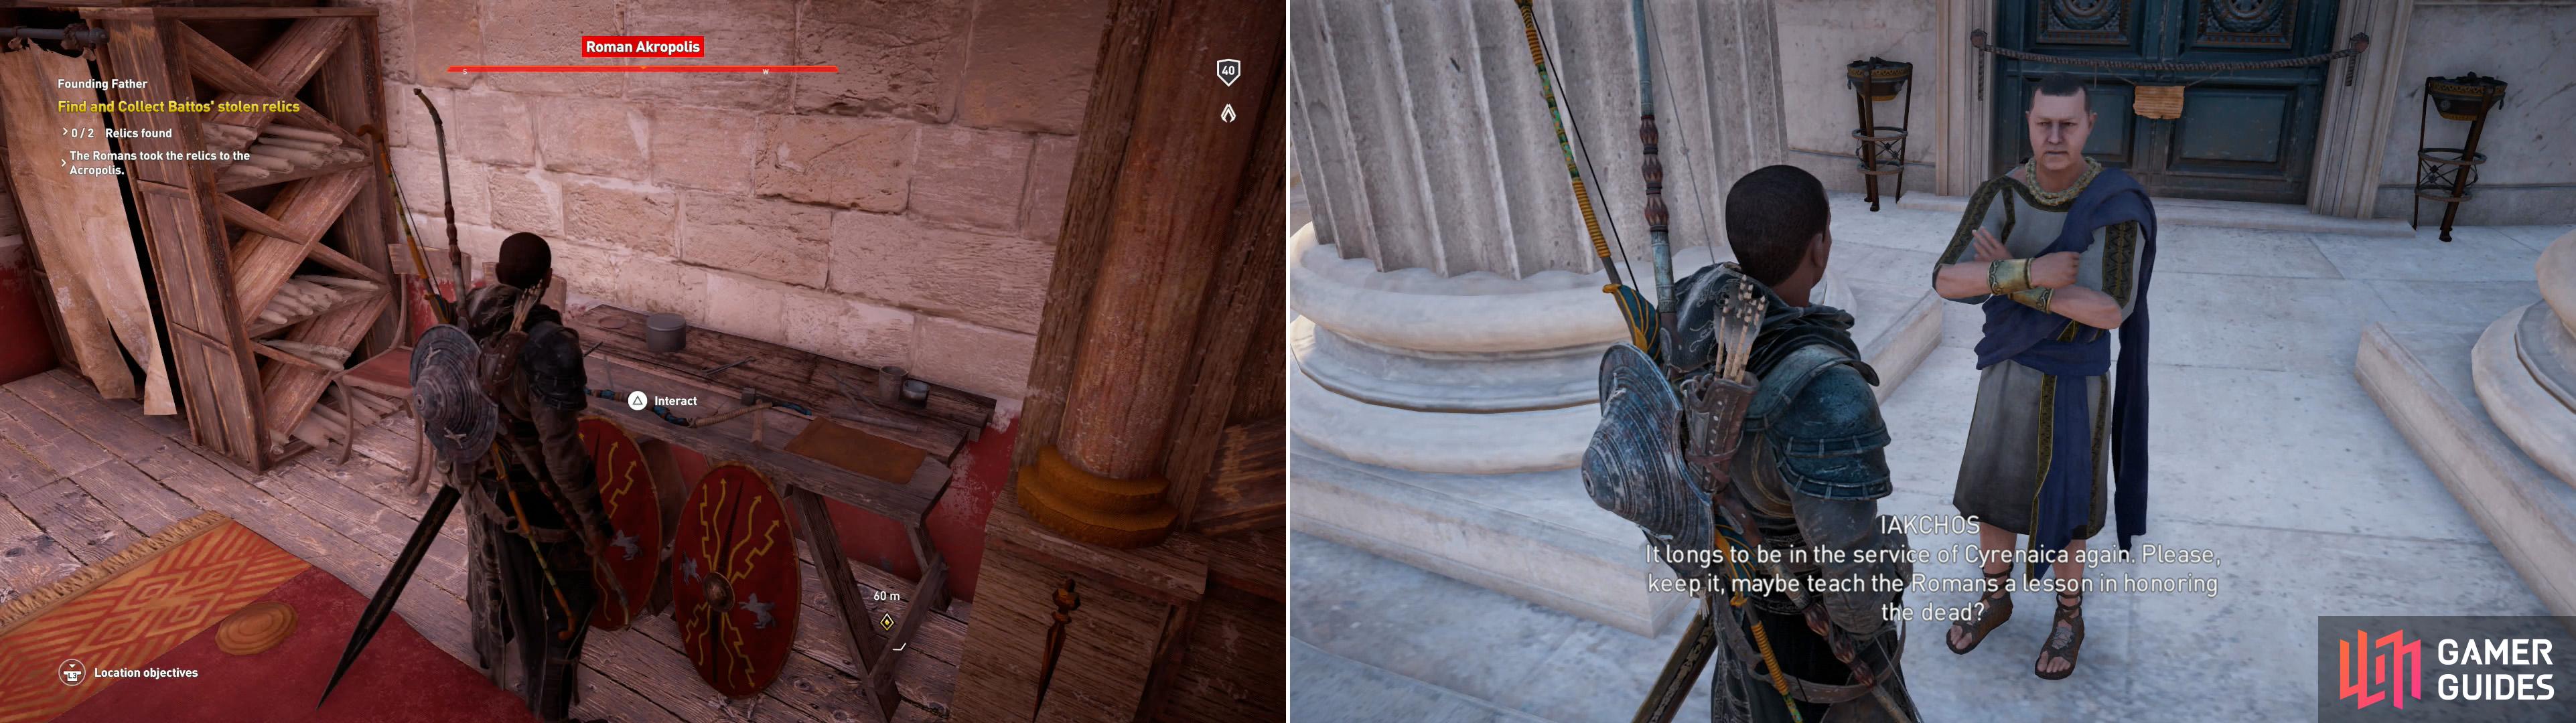 Pick up the relics (left) then return them to Iakchos (right).